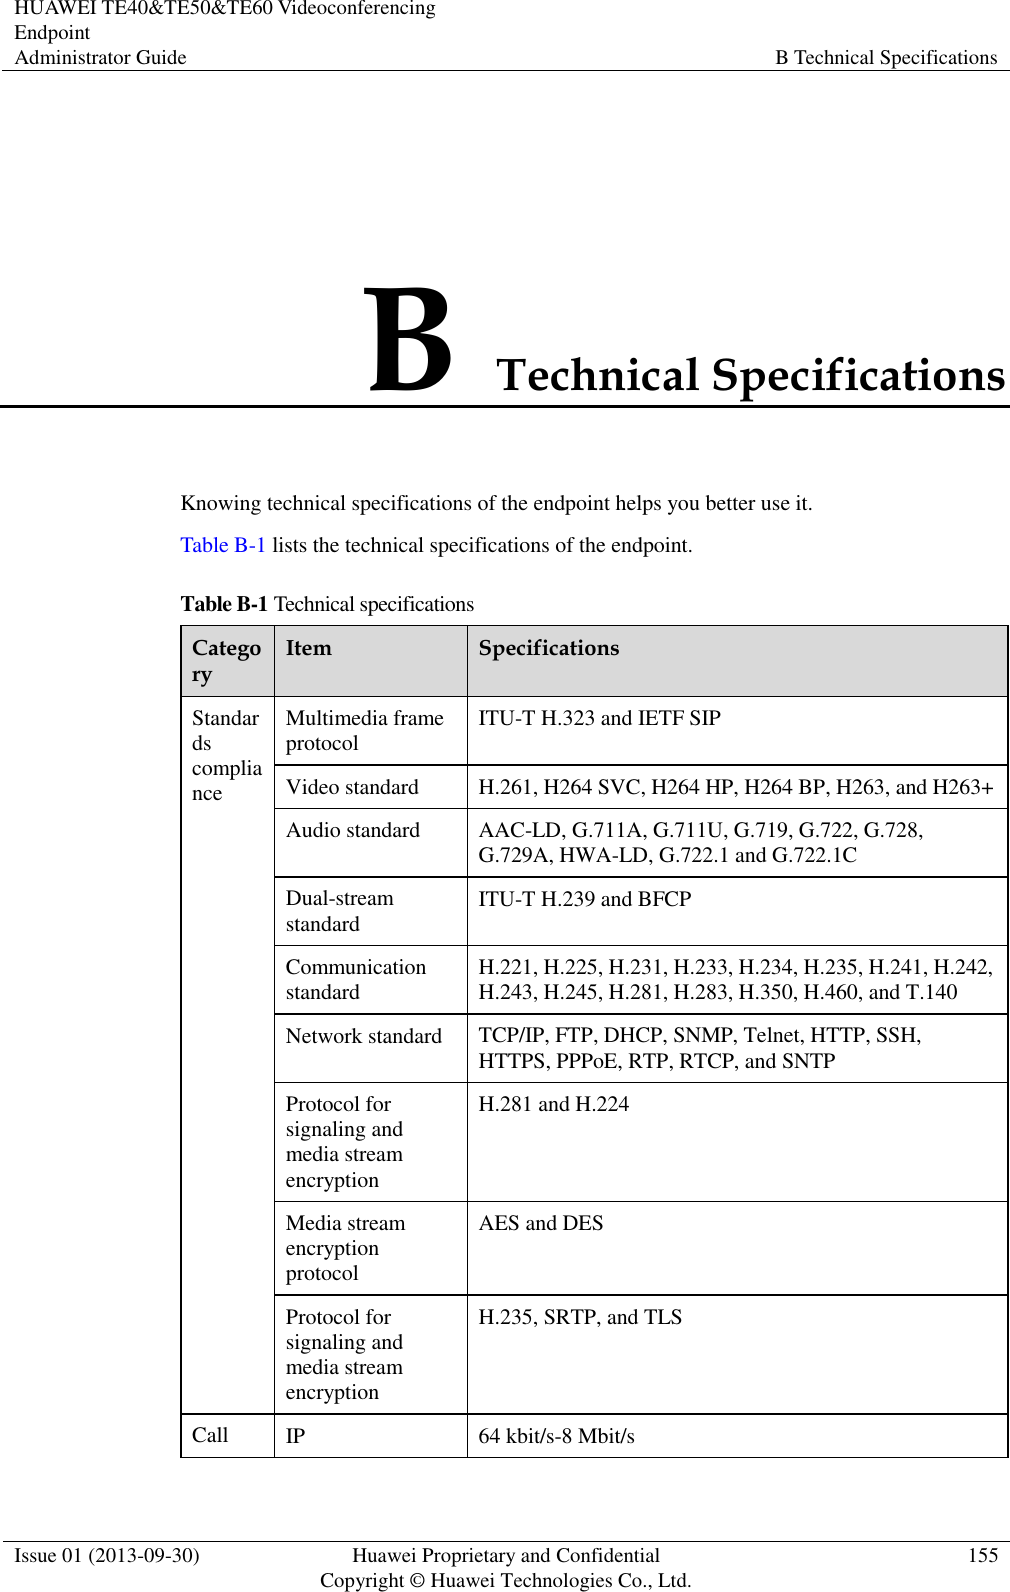 HUAWEI TE40&amp;TE50&amp;TE60 Videoconferencing Endpoint Administrator Guide B Technical Specifications  Issue 01 (2013-09-30) Huawei Proprietary and Confidential                                     Copyright © Huawei Technologies Co., Ltd. 155  B Technical Specifications Knowing technical specifications of the endpoint helps you better use it. Table B-1 lists the technical specifications of the endpoint. Table B-1 Technical specifications Category Item Specifications Standards compliance Multimedia frame protocol ITU-T H.323 and IETF SIP Video standard H.261, H264 SVC, H264 HP, H264 BP, H263, and H263+ Audio standard AAC-LD, G.711A, G.711U, G.719, G.722, G.728, G.729A, HWA-LD, G.722.1 and G.722.1C Dual-stream standard ITU-T H.239 and BFCP Communication standard H.221, H.225, H.231, H.233, H.234, H.235, H.241, H.242, H.243, H.245, H.281, H.283, H.350, H.460, and T.140 Network standard TCP/IP, FTP, DHCP, SNMP, Telnet, HTTP, SSH, HTTPS, PPPoE, RTP, RTCP, and SNTP Protocol for signaling and media stream encryption H.281 and H.224 Media stream encryption protocol AES and DES Protocol for signaling and media stream encryption H.235, SRTP, and TLS Call IP 64 kbit/s-8 Mbit/s 